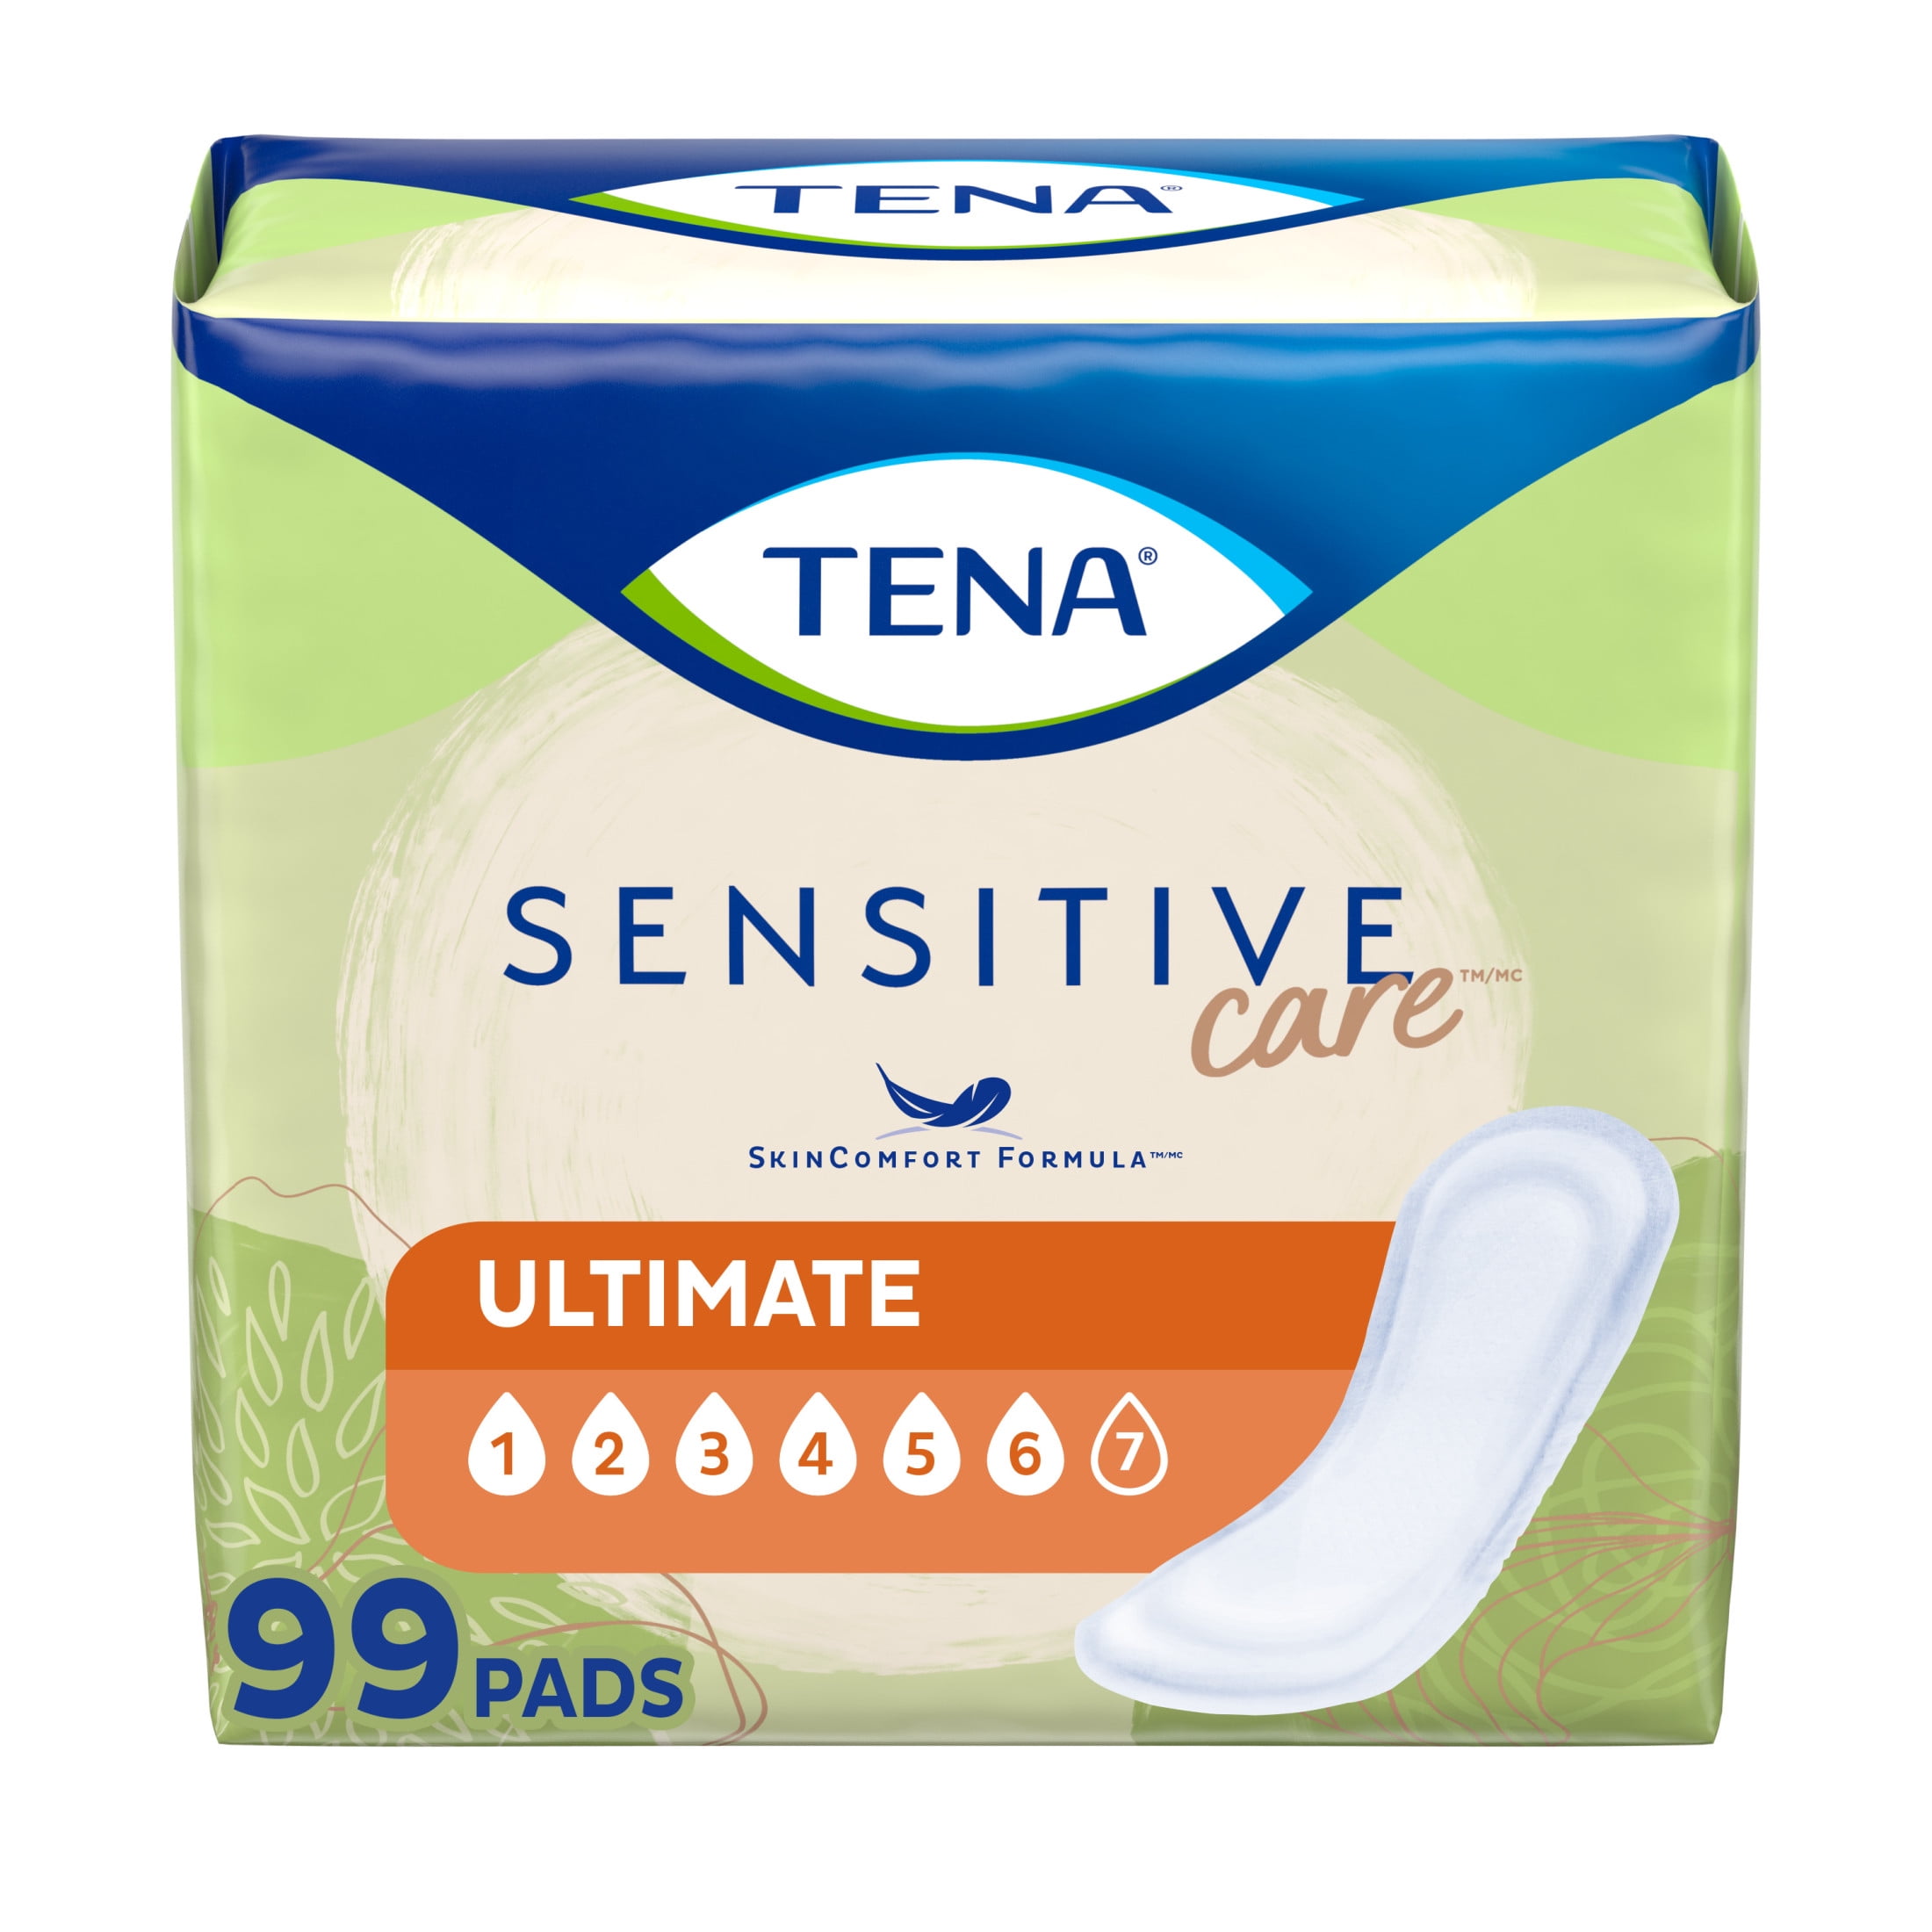 TENA Sensitive Care Ultimate Absorbency Incontinence/Bladder Control Pad,  Regular Length, 10 Count